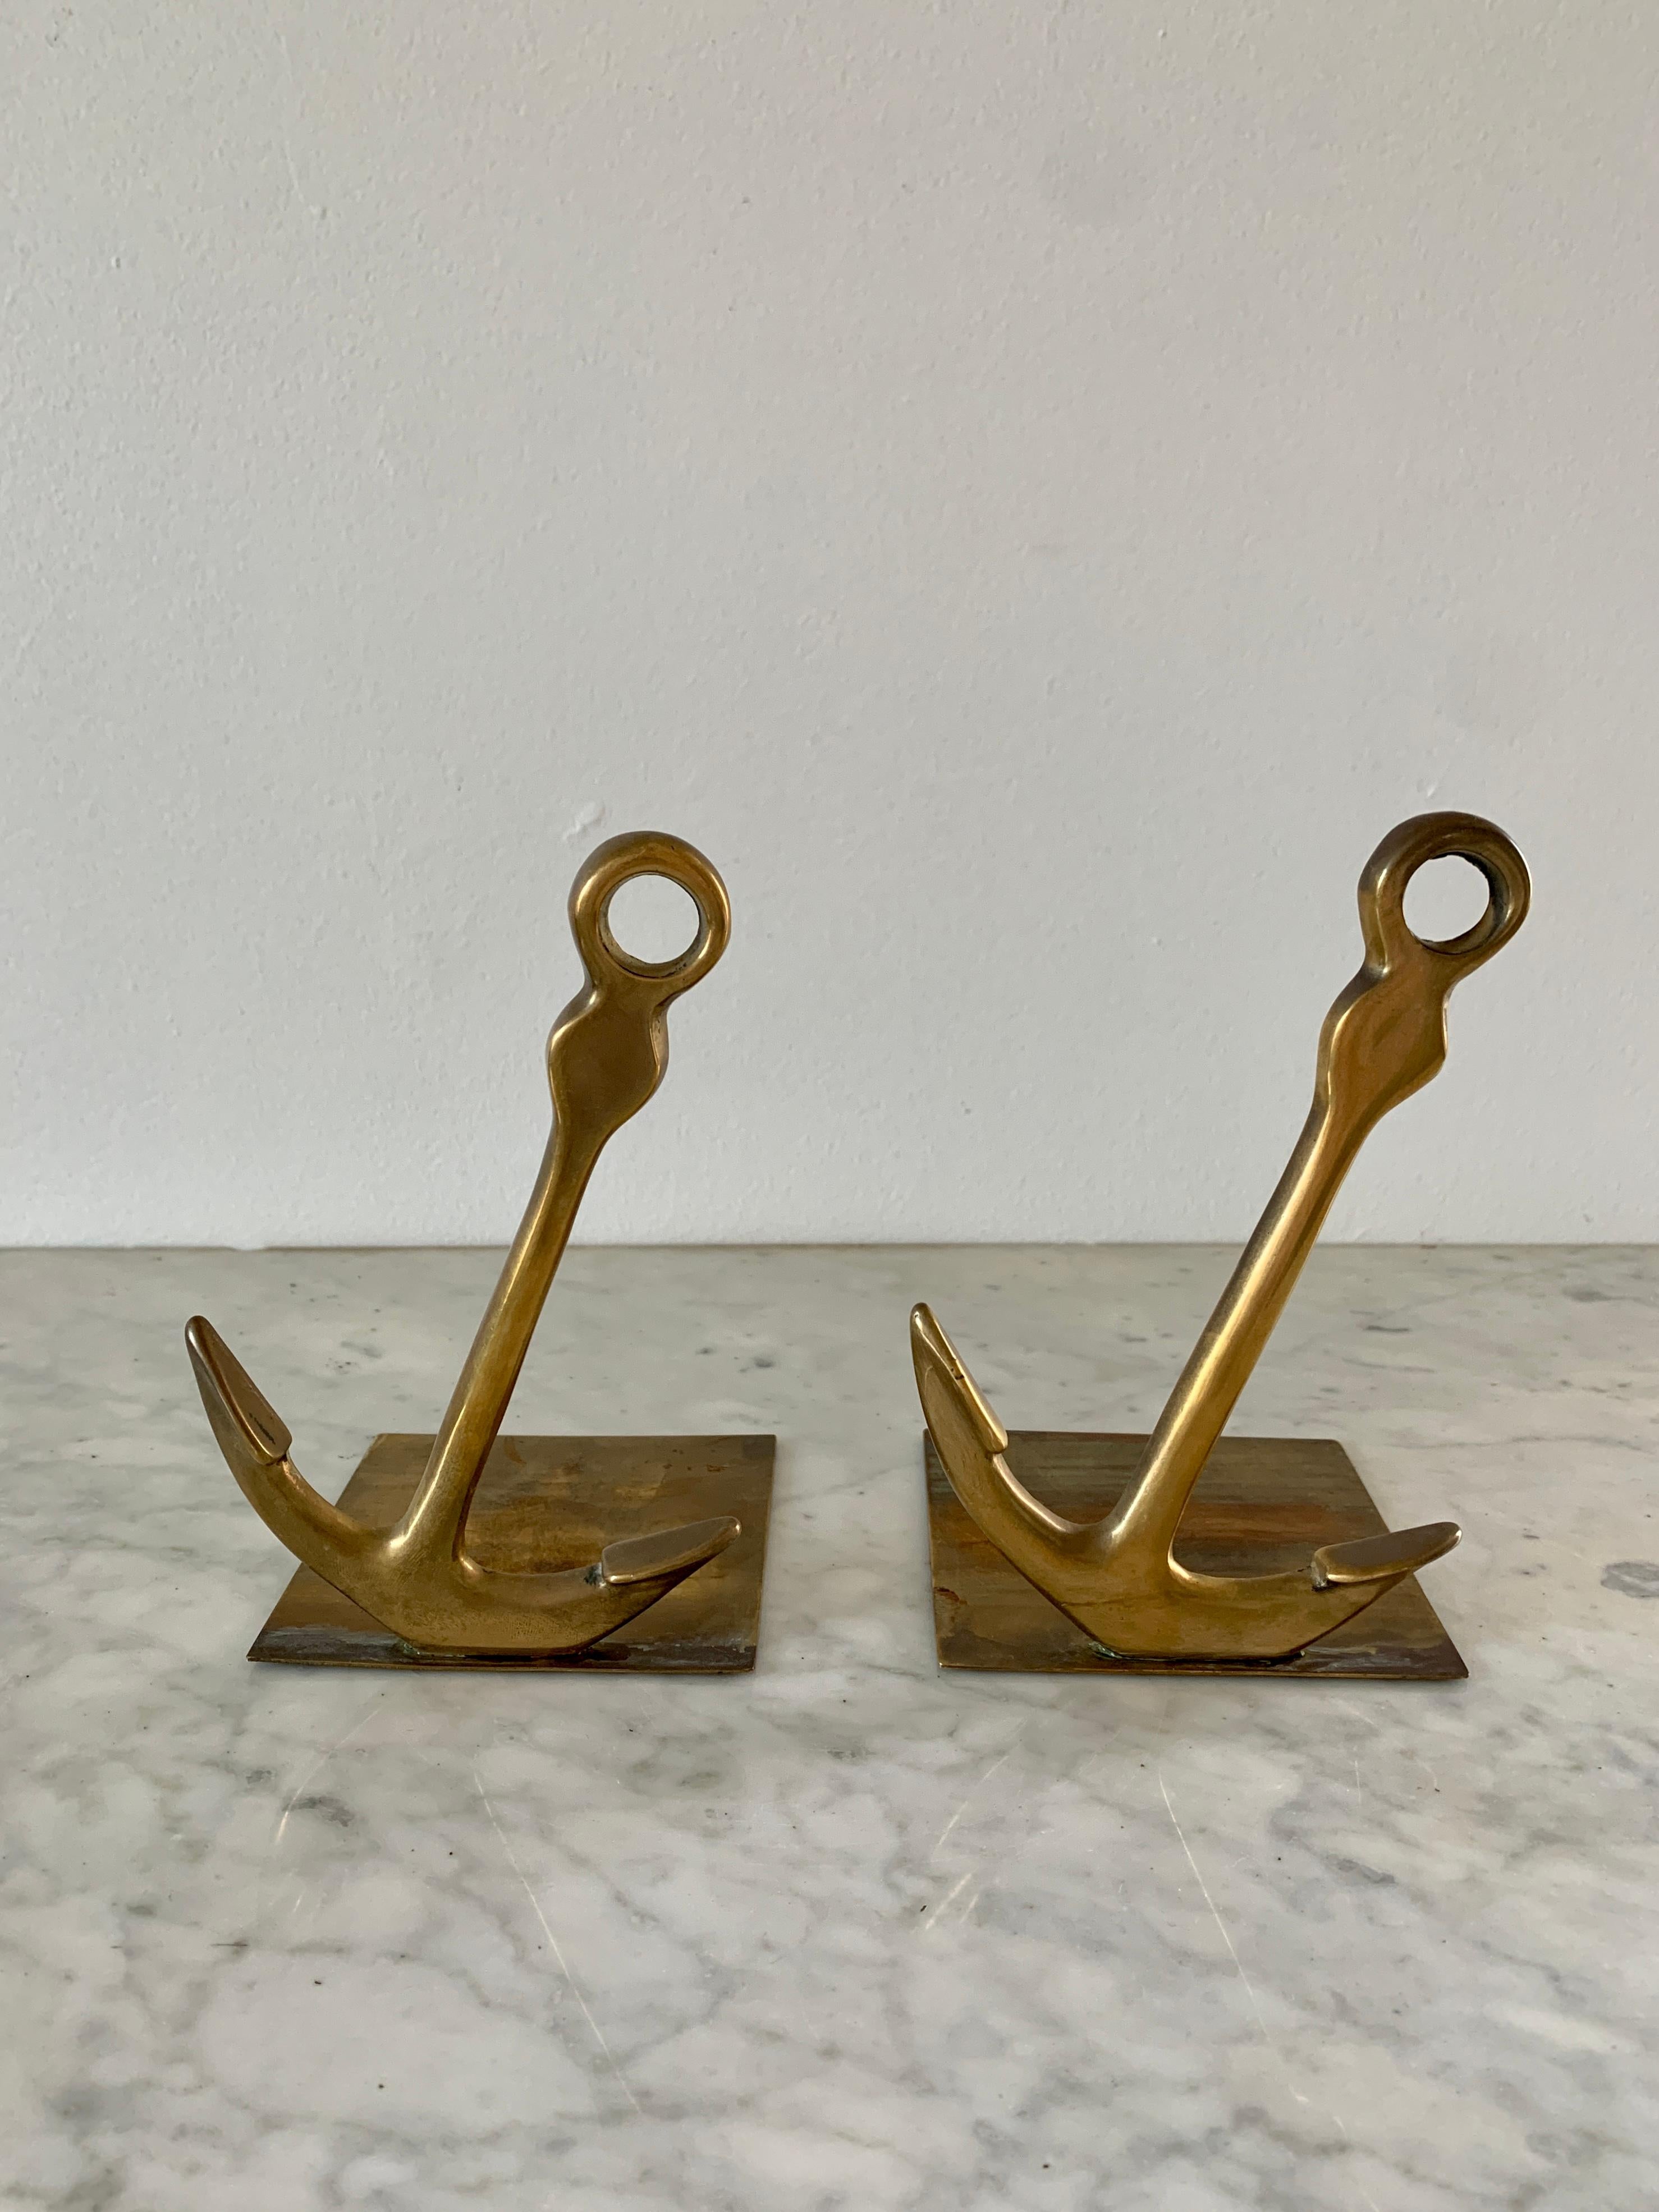 A charming pair of cast solid brass anchor bookends. Perfect for your Nantucket, Cape, or Hamptons home! 

USA, Mid-20th Century

Measures: 4